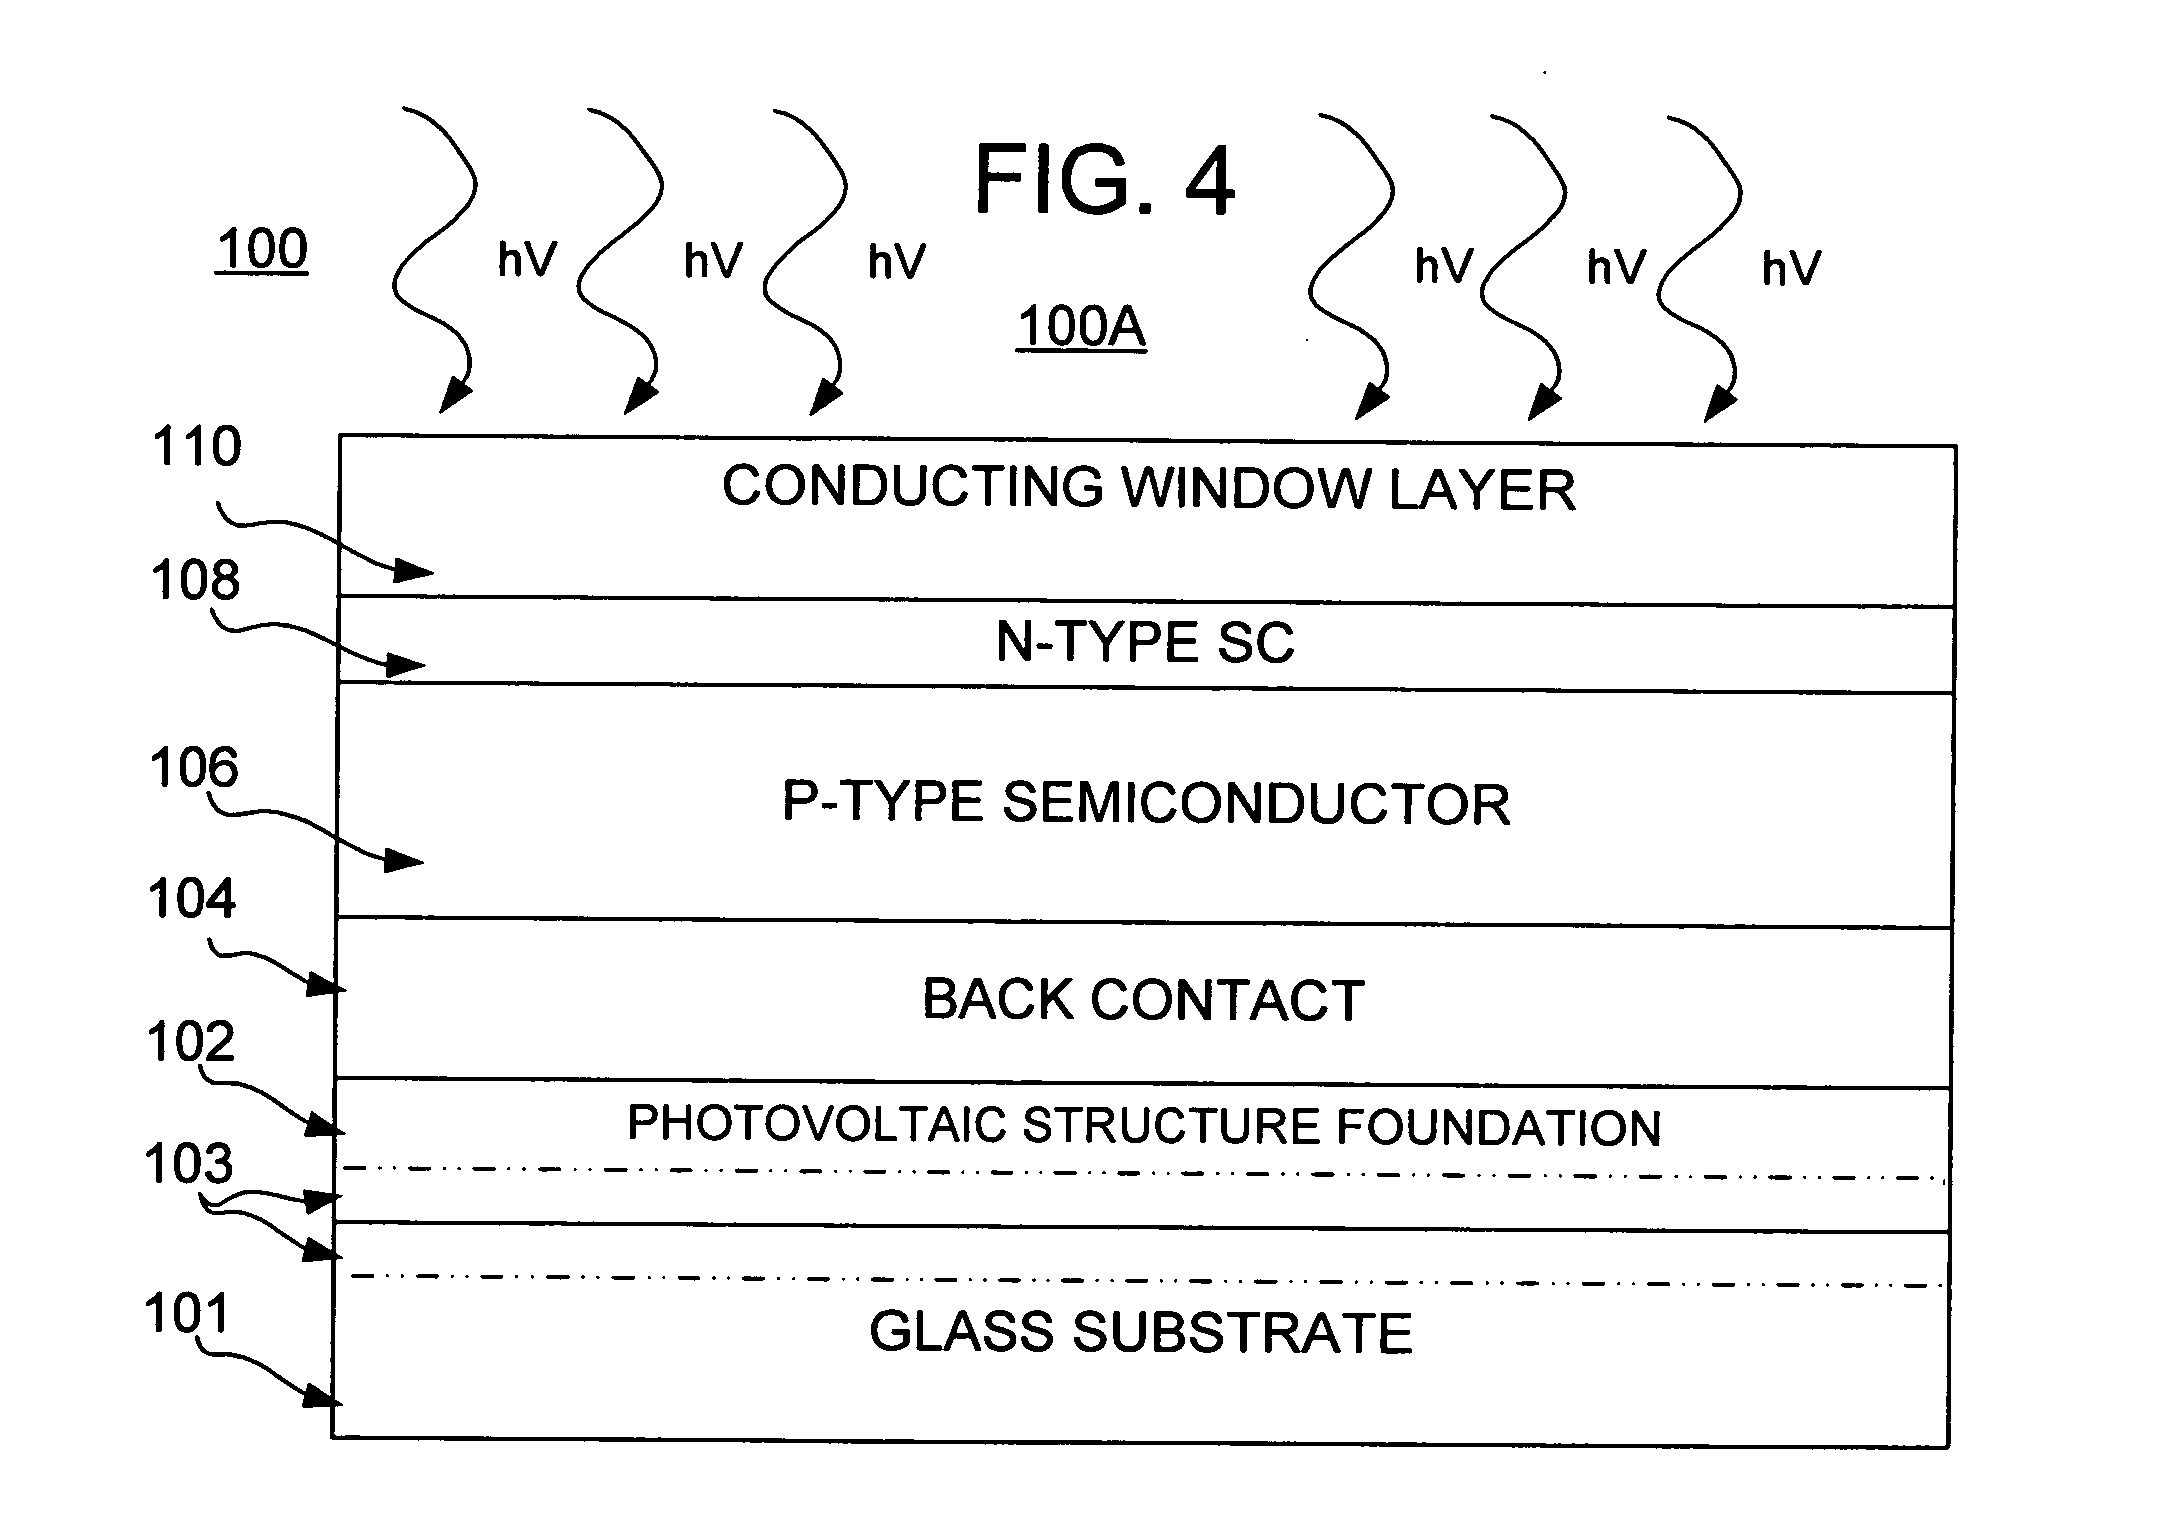 Thin film photovoltaic structure